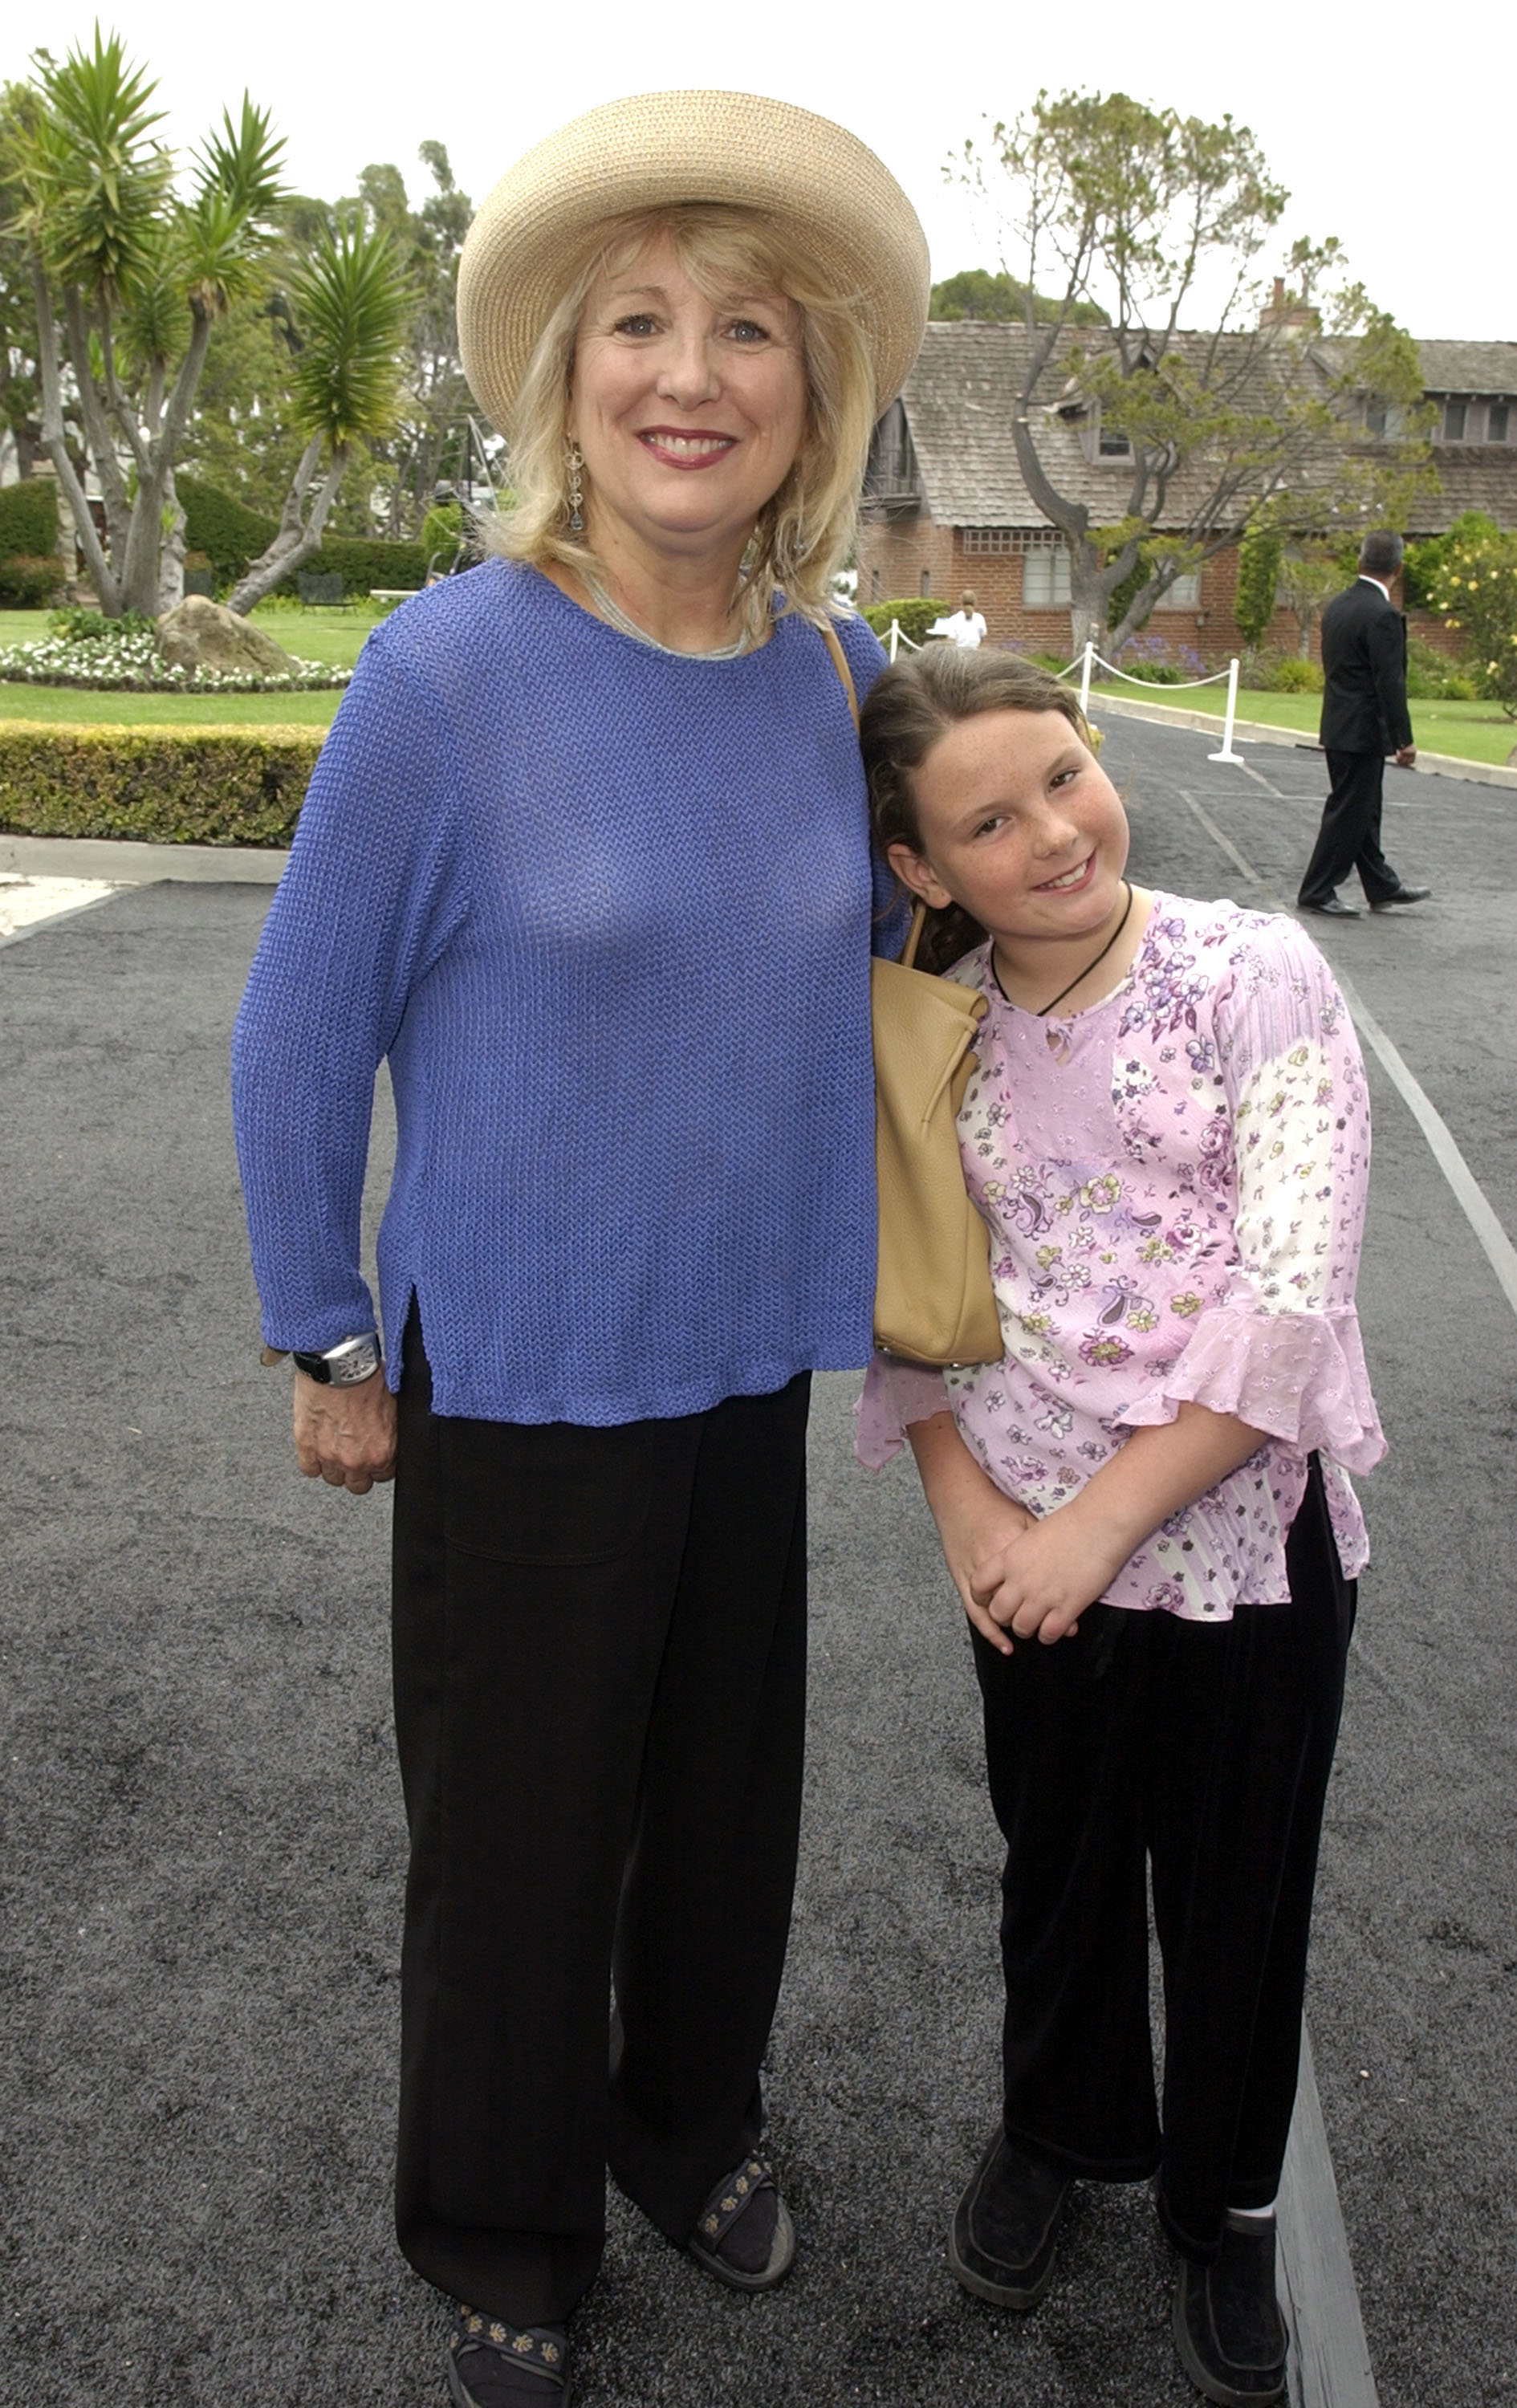 Teri Garr and Molly O'Neil during 6th Annual "QVC's Cure by the Shore" to Benefit the National Multiple Sclerosis Society at the Private Residence in Malibu, California on May 17, 2003. | Source: Getty Images